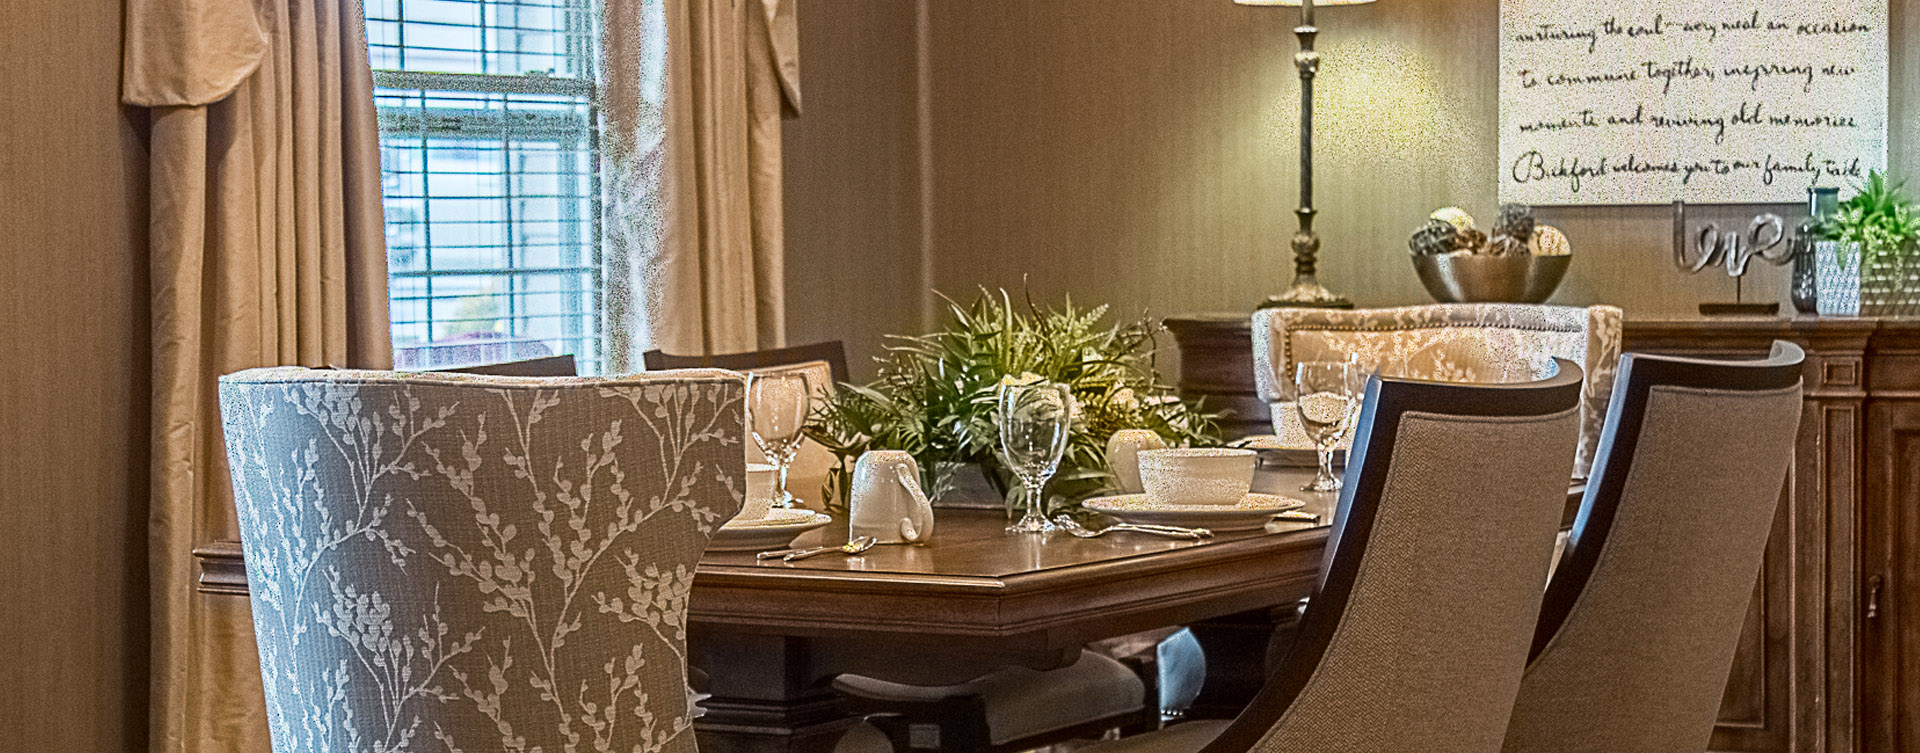 Have fun with themed and holiday meals in the private dining room at Bickford of Davenport